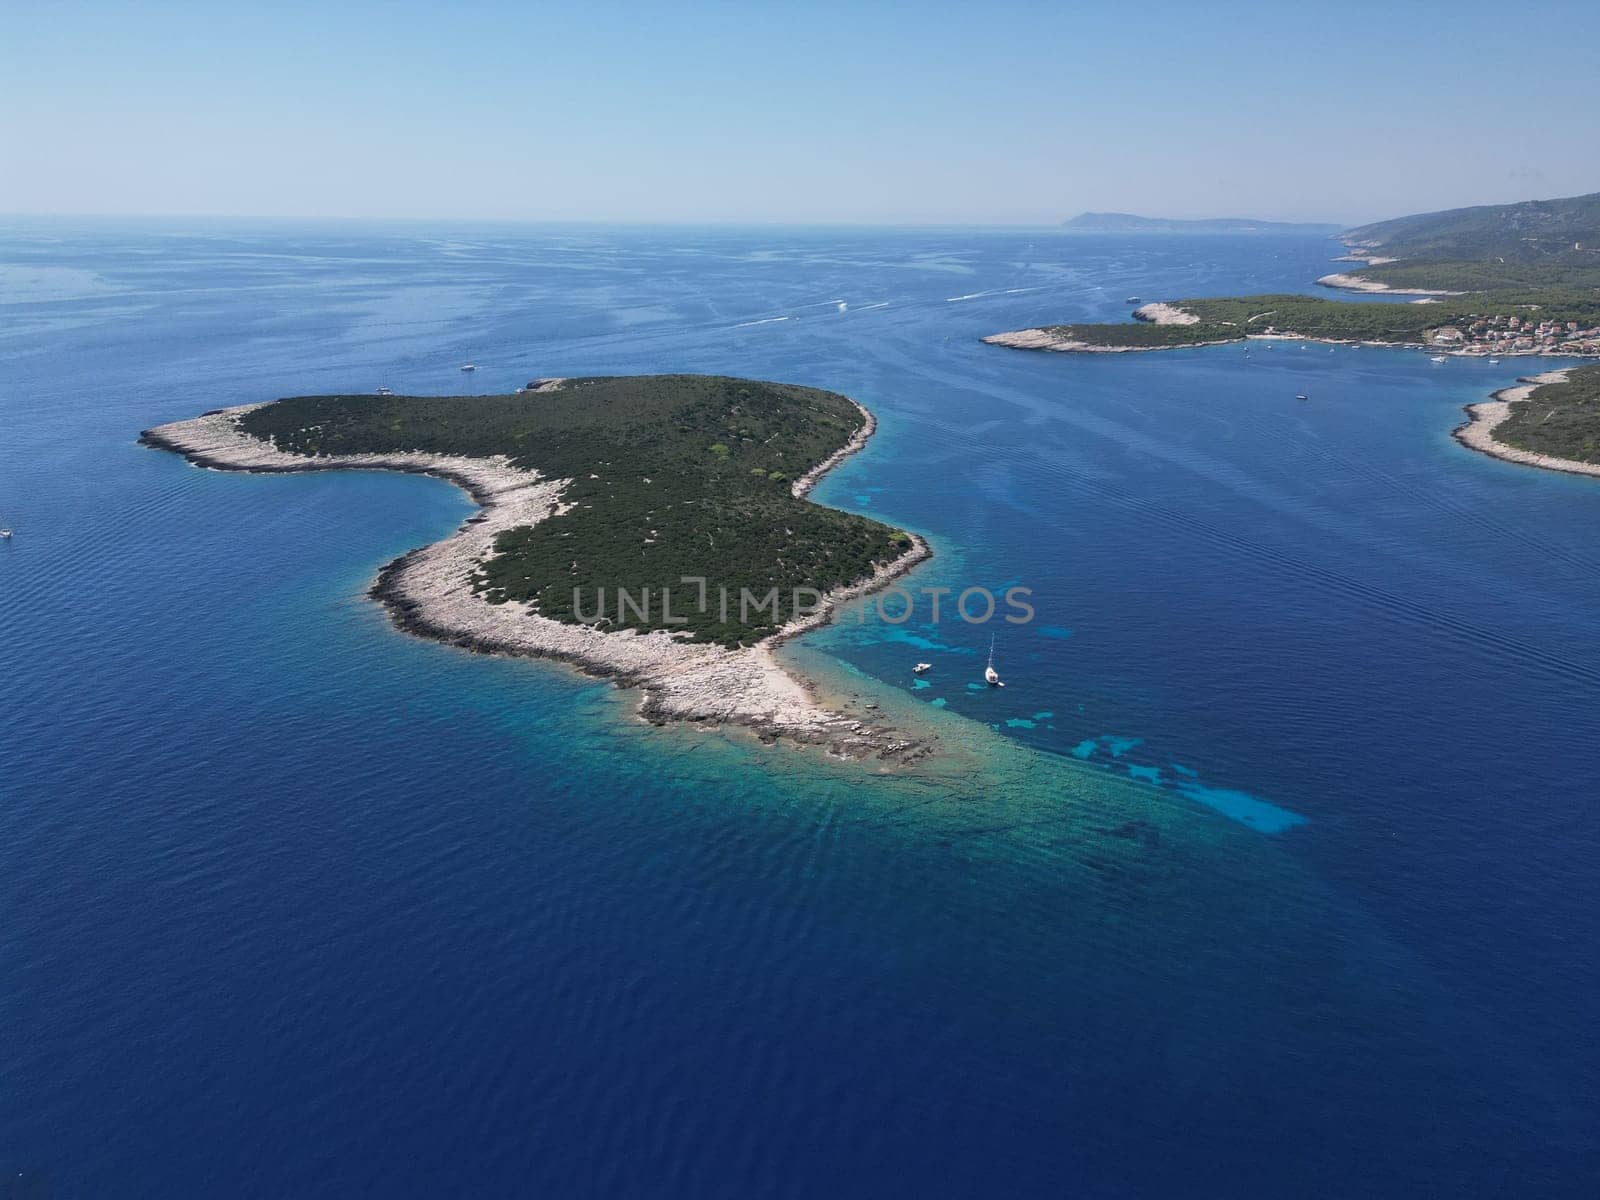 Vis Island, in Italian Lissa, island of Croatia in the Adriatic Sea. It is the outermost major island of the Dalmatian archipelago panoramic aerial view landscape